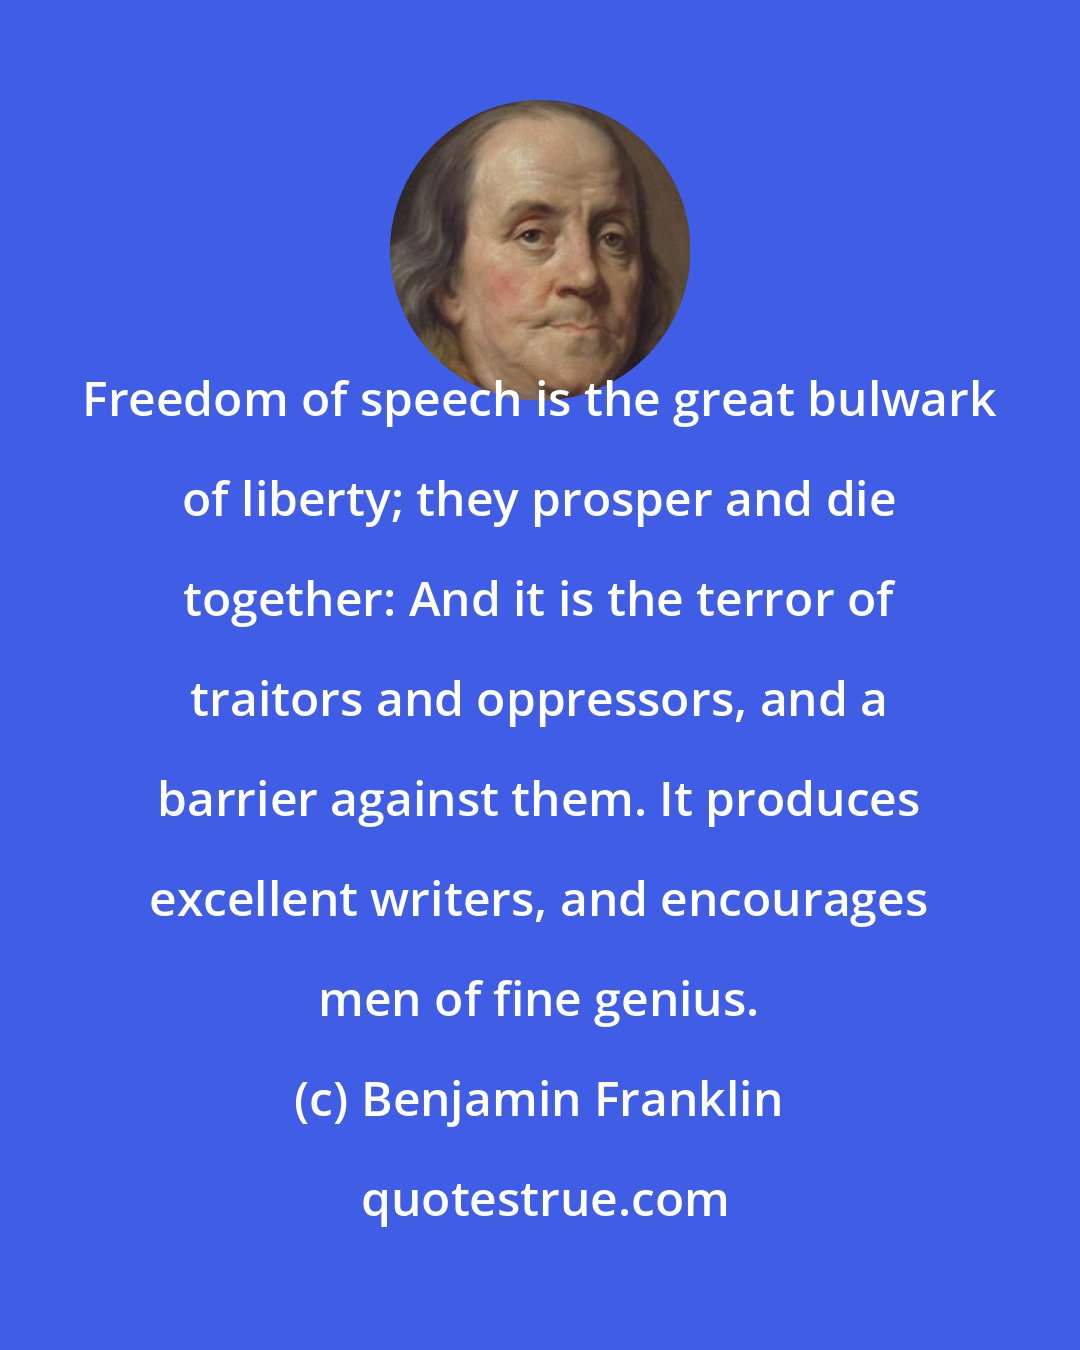 Benjamin Franklin: Freedom of speech is the great bulwark of liberty; they prosper and die together: And it is the terror of traitors and oppressors, and a barrier against them. It produces excellent writers, and encourages men of fine genius.